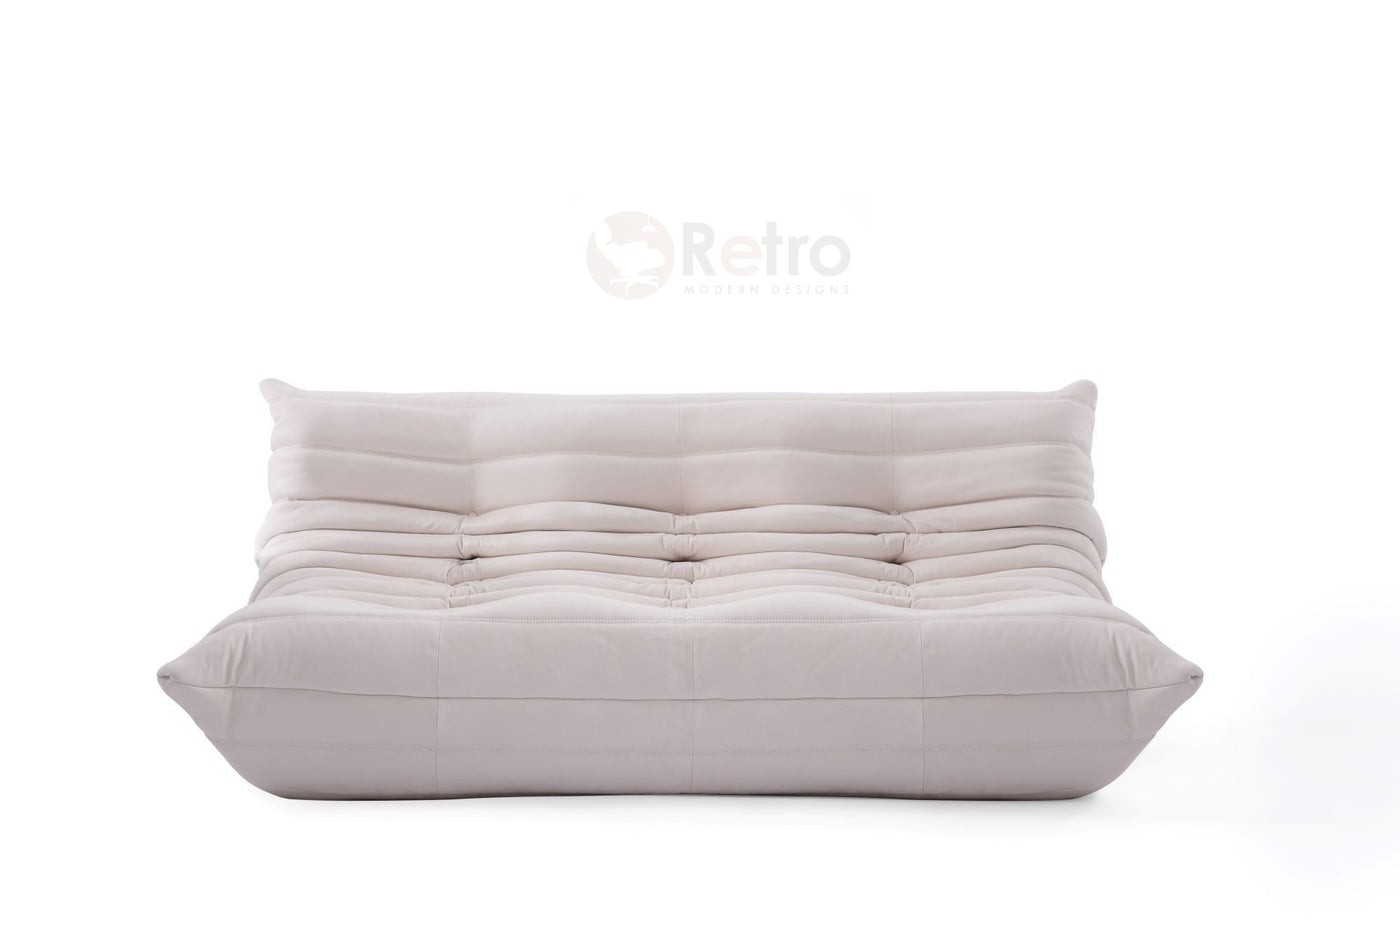 Russo Sofa in a Micro suede